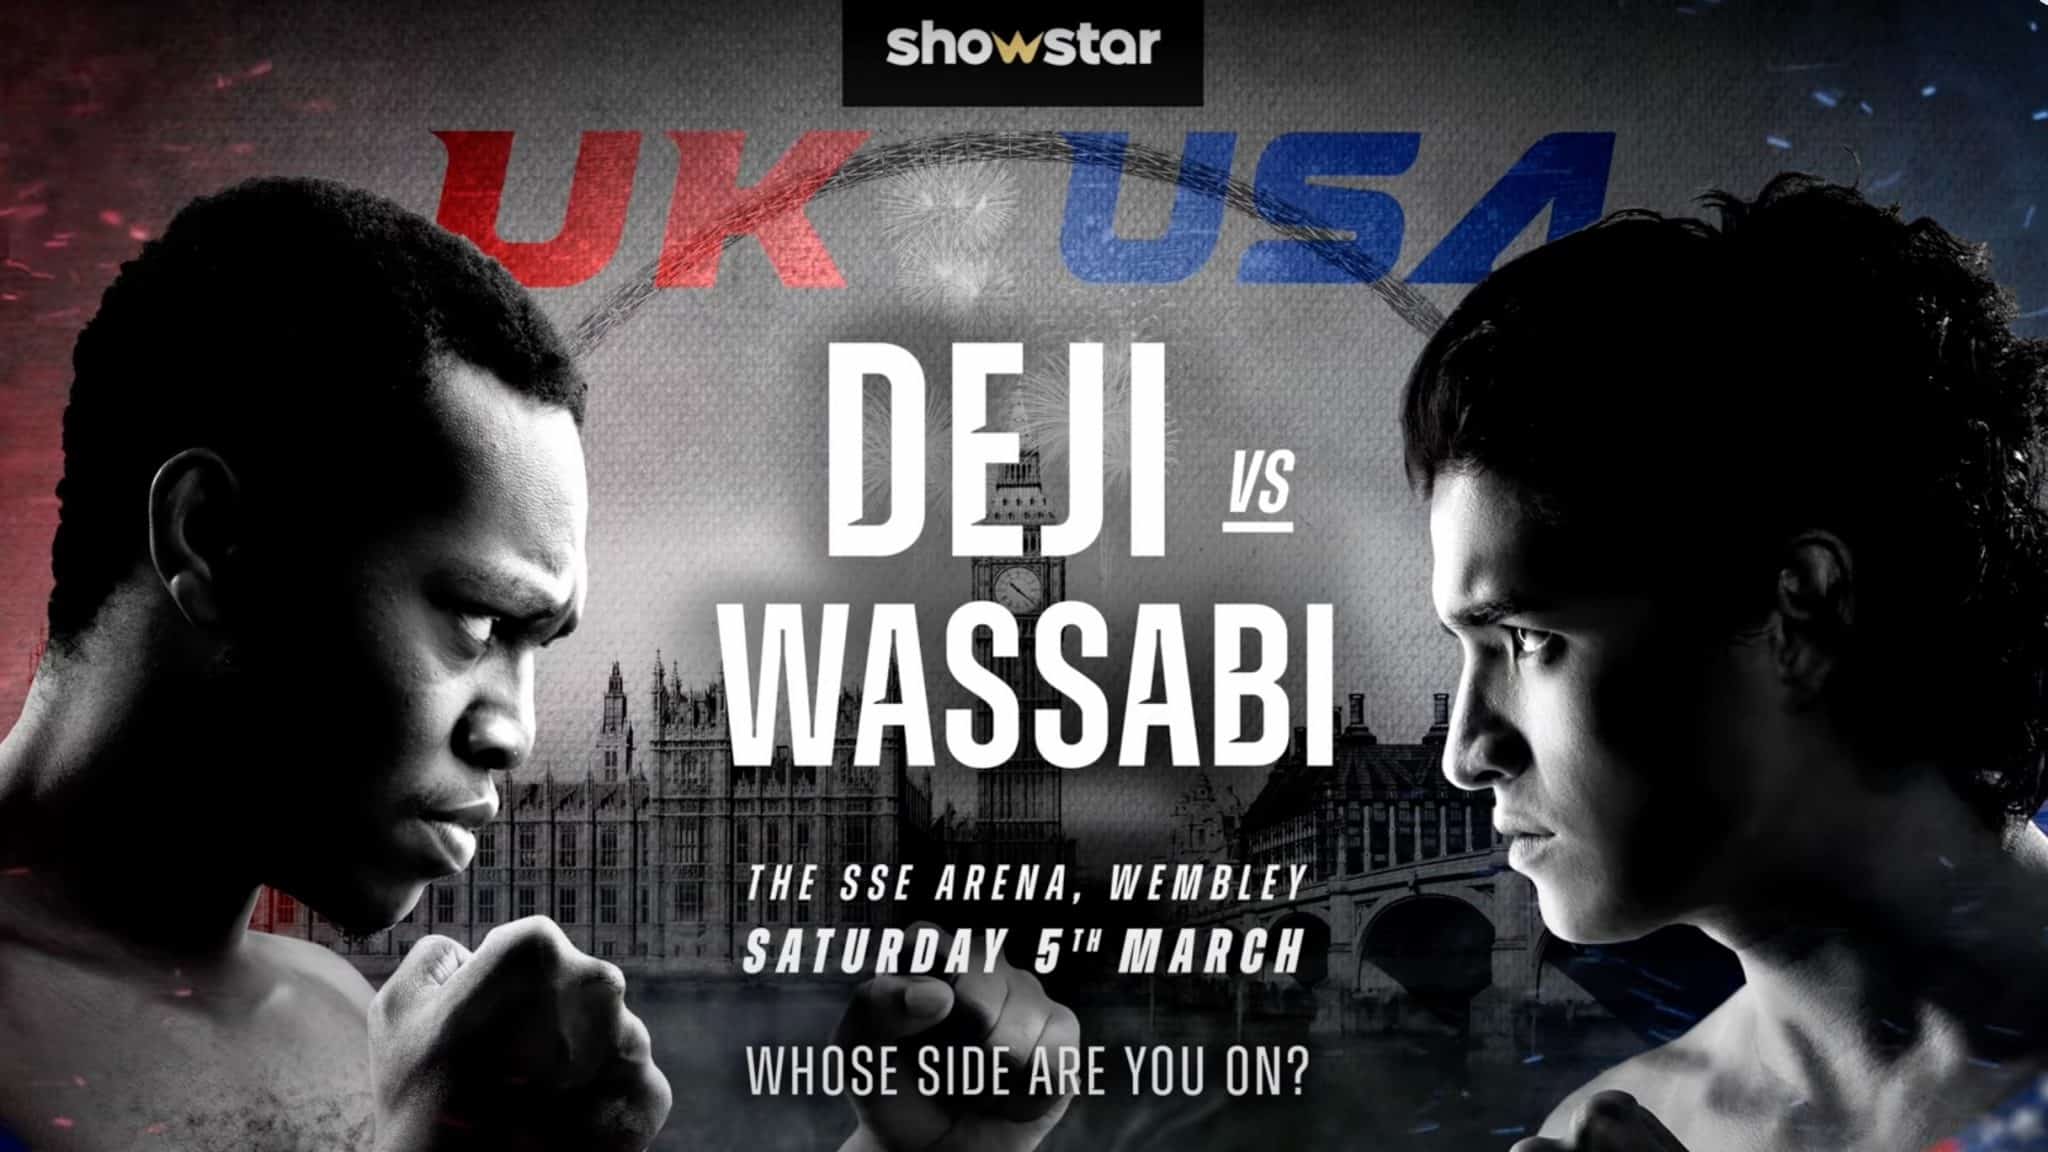 How to watch Showstars UK vs USA boxing event Stream, fight card, more